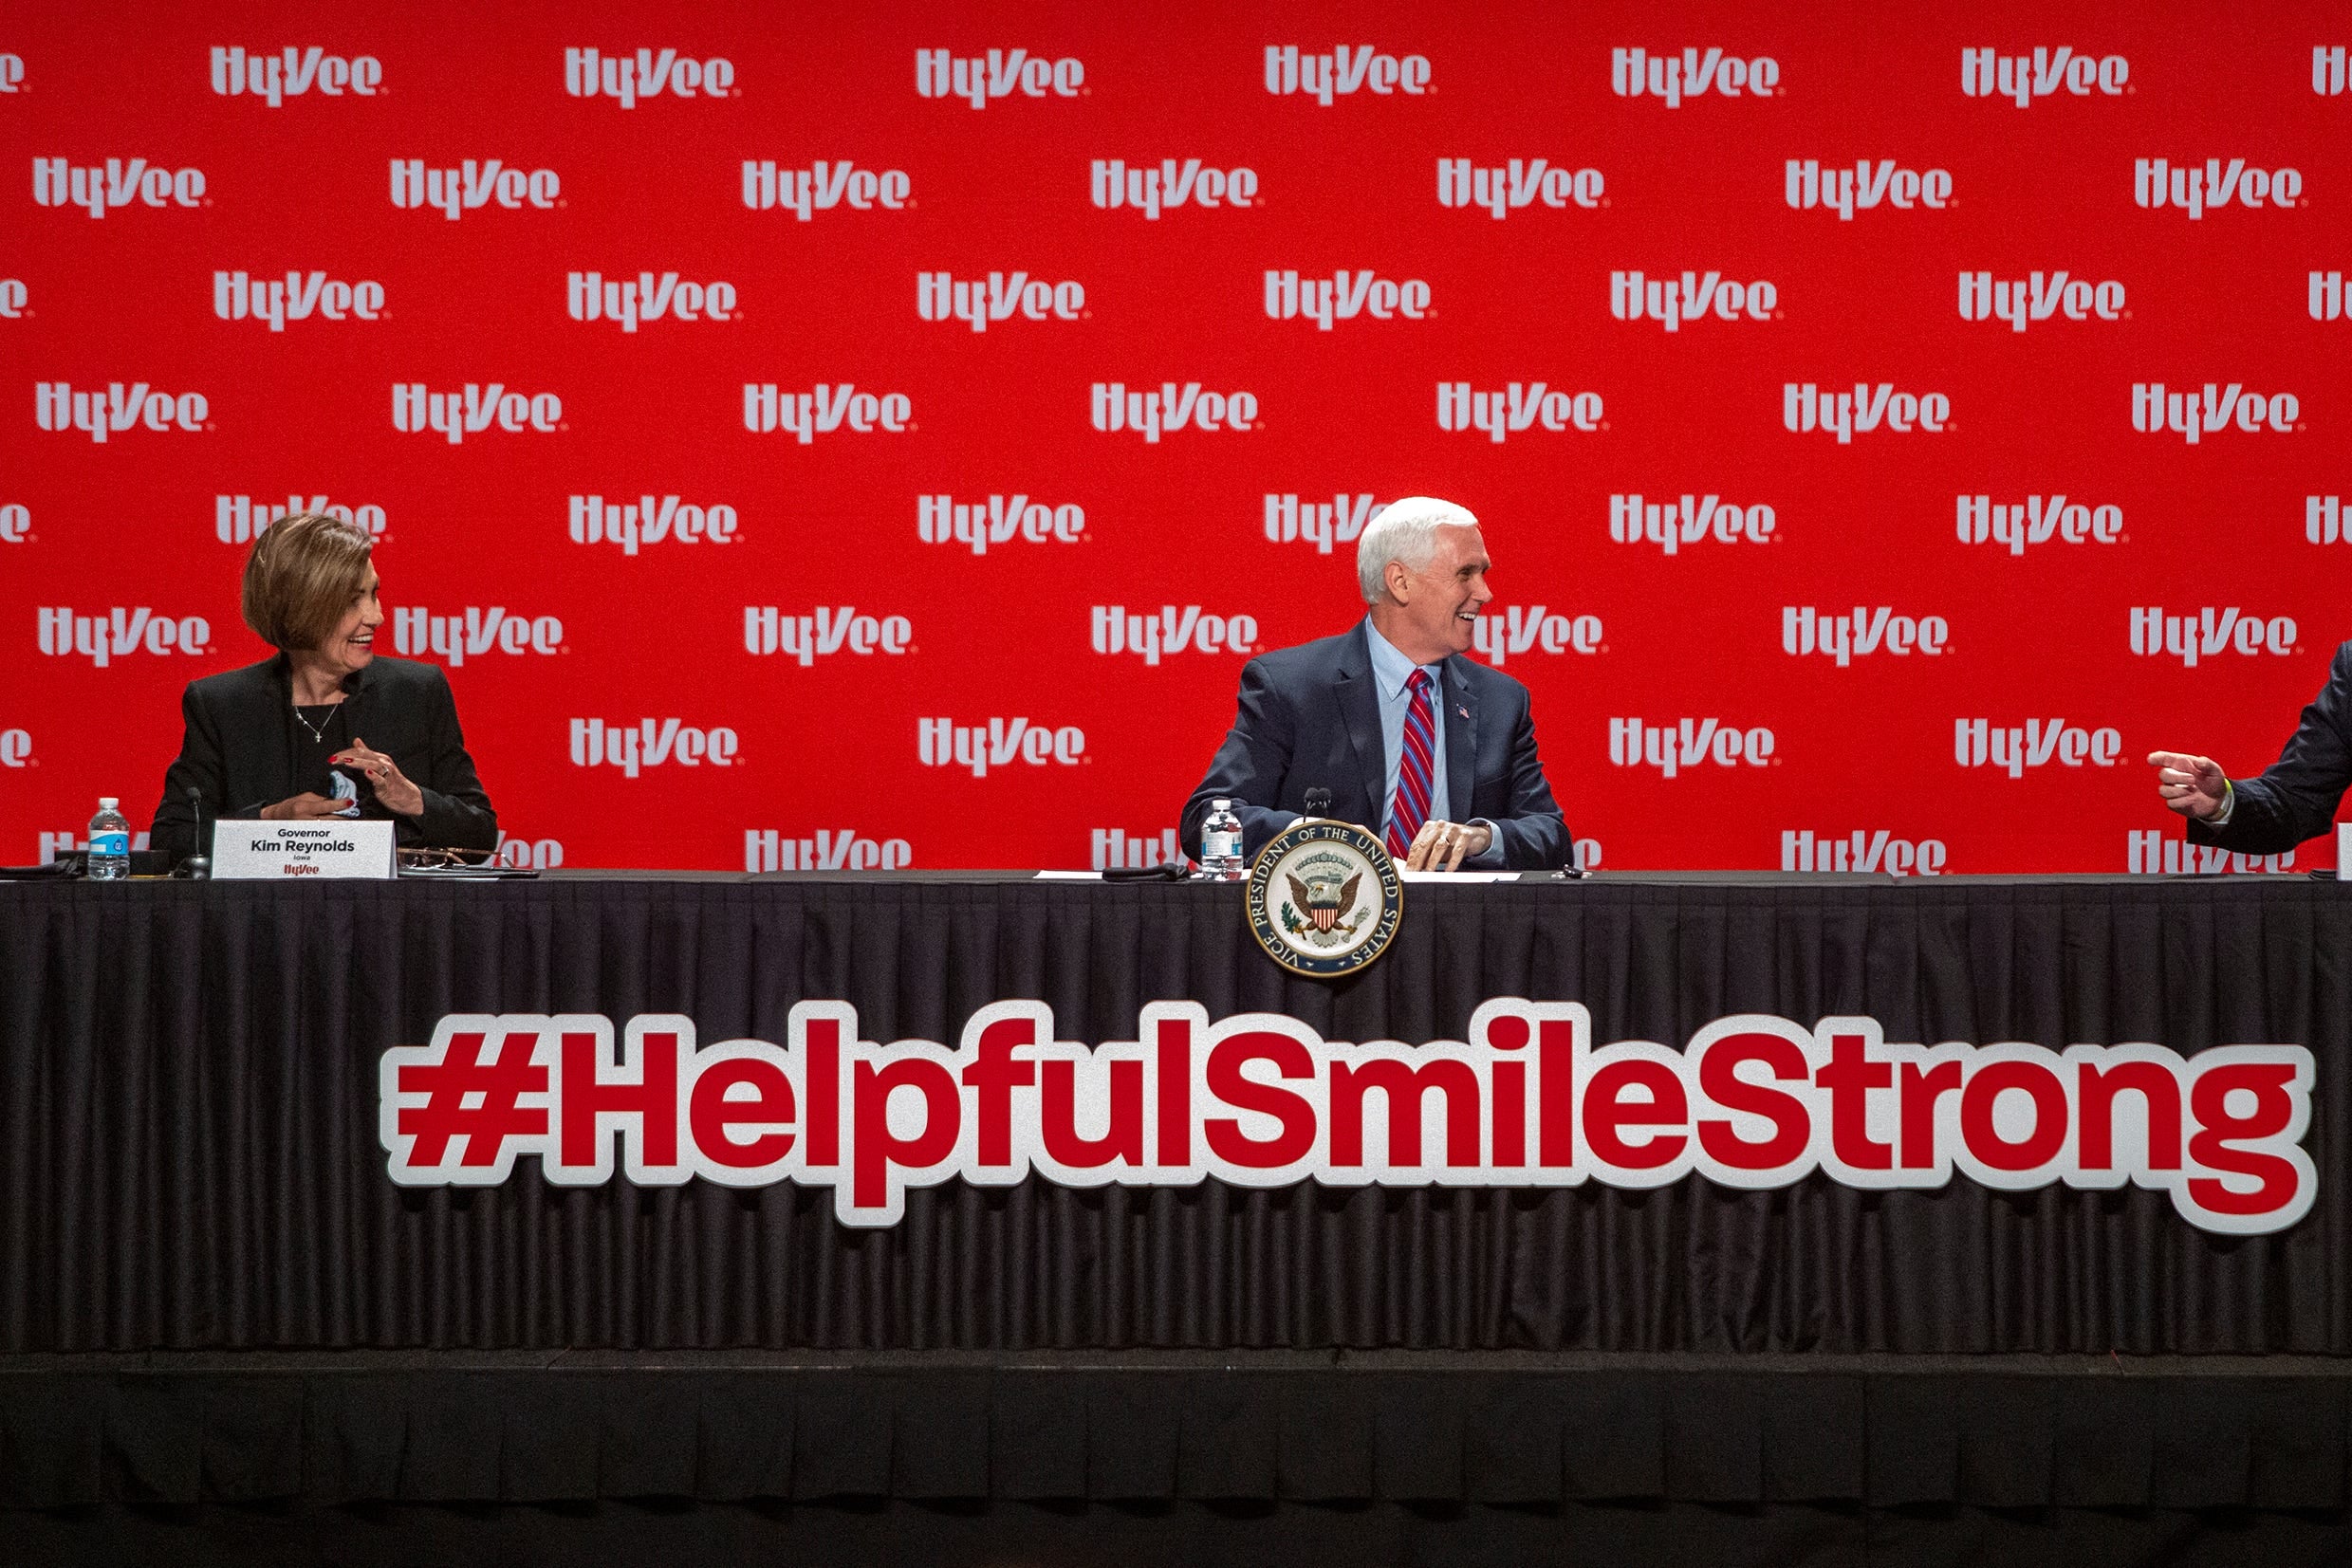 Kim Reynolds, Mike Pence, and Randy Edeker sit spaced apart on a panel that says #HelpfulSmileStrong